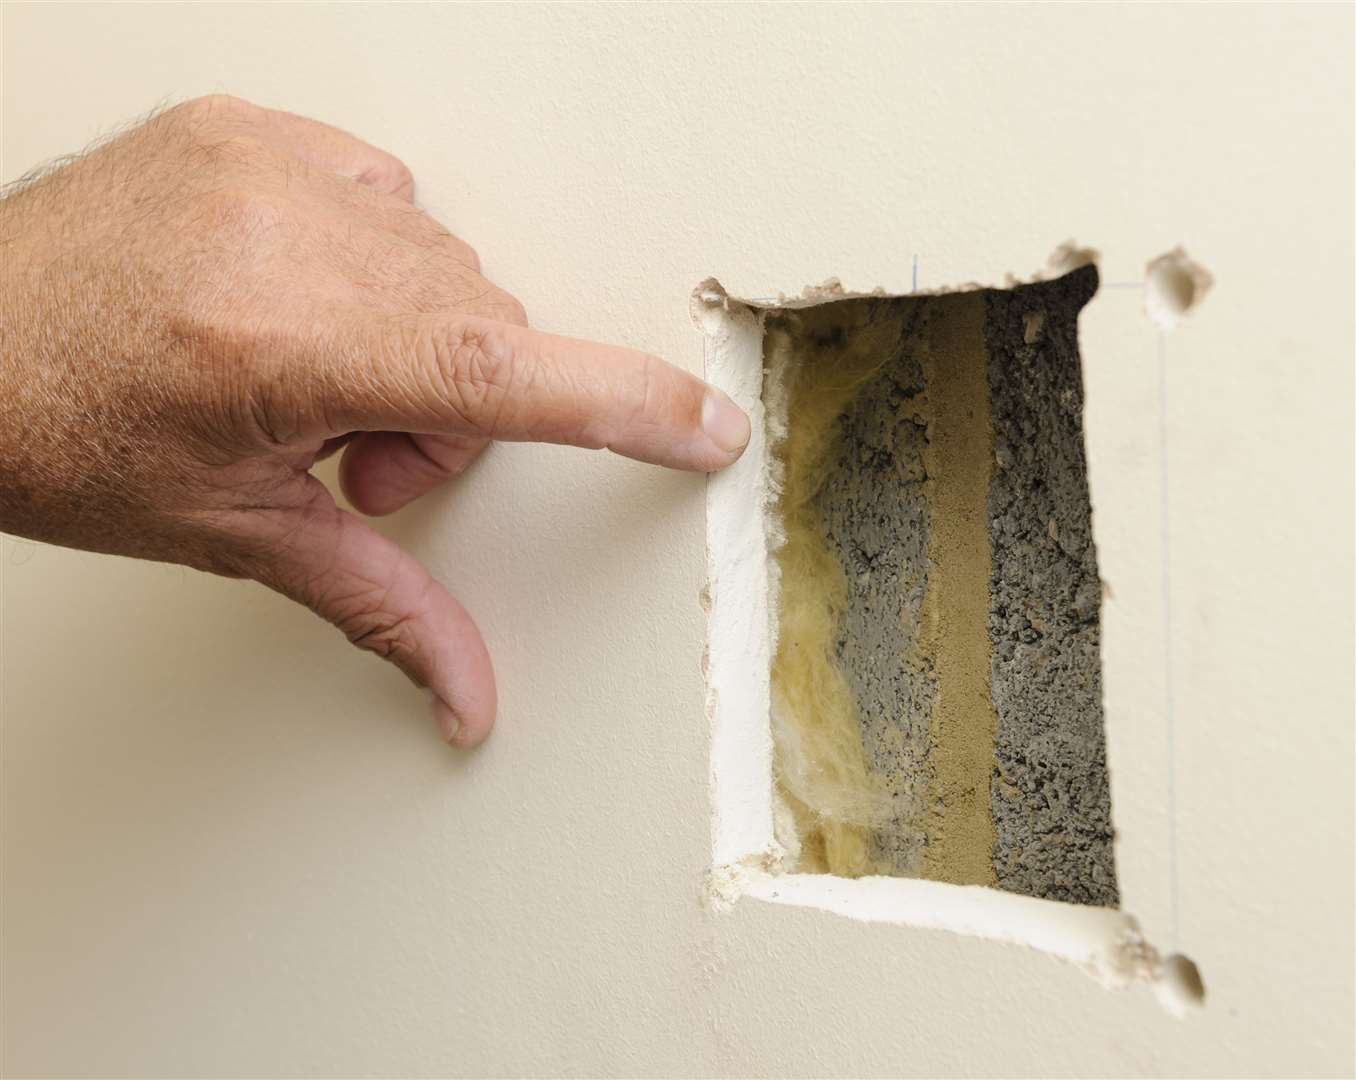 Jose Bolou made his own inspection hole to examine the wall's construction